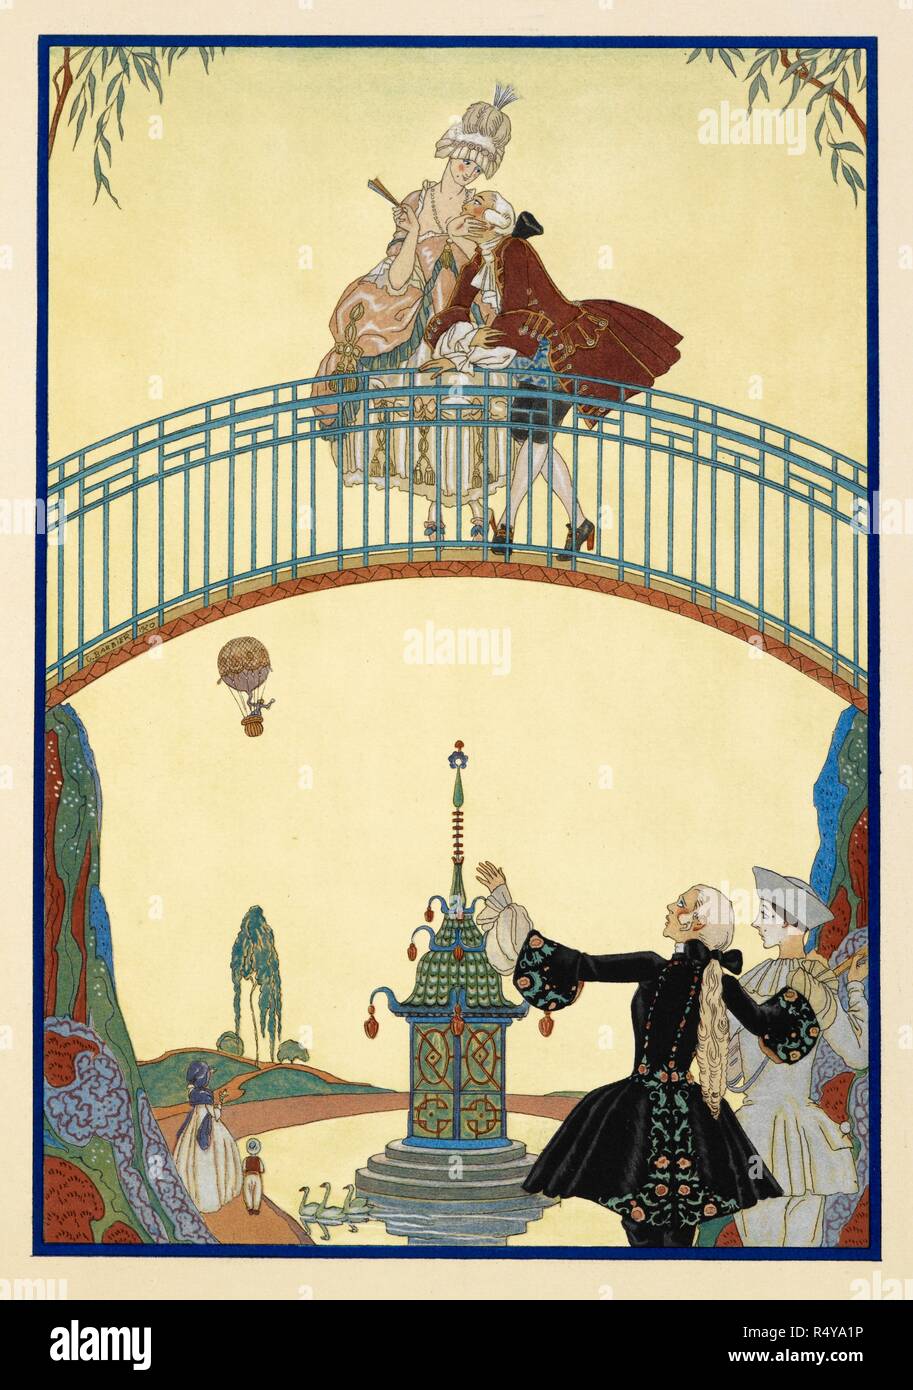 Ã€ La Promenade. A man and woman on a bridge. Pierrot, below. FÃªtes galantes. [PoÃ¨mes]. Illustrations de George Barbier. Paris: H. Piazza, 1928. FÃªtes Galantes is an album consisting of romantic prints of French life among the upper classes of the 19th century. Rich aristocrats of the French court used to play gallant scenes from the commedia dellâ€™ arte that were called Fetes Galantes. The prints accompany Paul Verlaine's poetry. Each album contains 20 lithograph prints with pochoir highlighting by George Barbier. Source: L.45/2847, before page 19. Language: French. Stock Photo